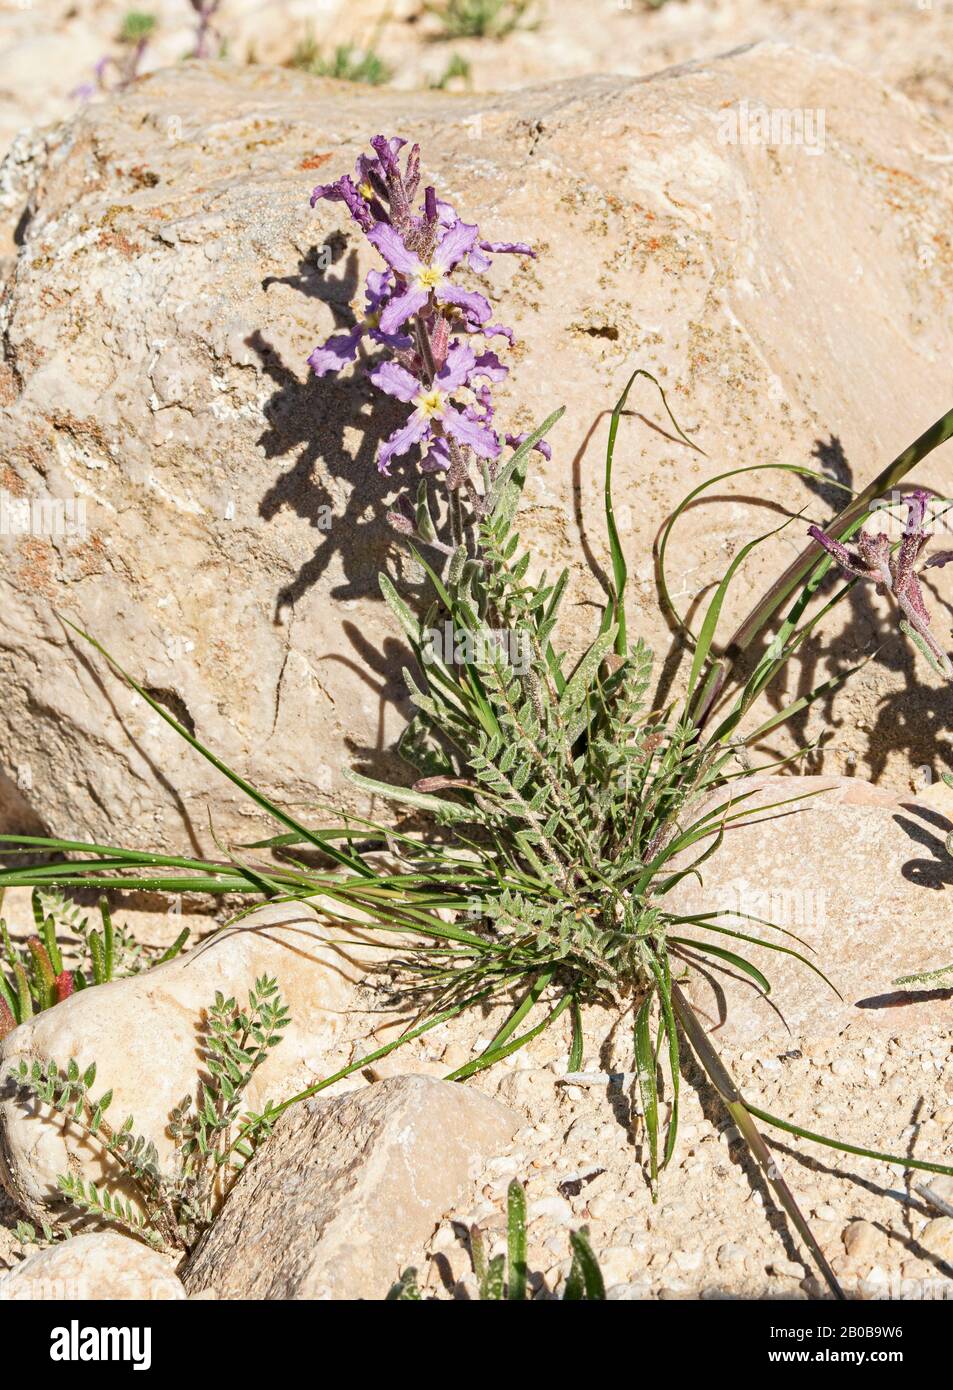 lavender and yellow Matthiola livida Livid Stock annual wildflowers growing among other desert plants and rocks in nahal akev in the negev in israel Stock Photo